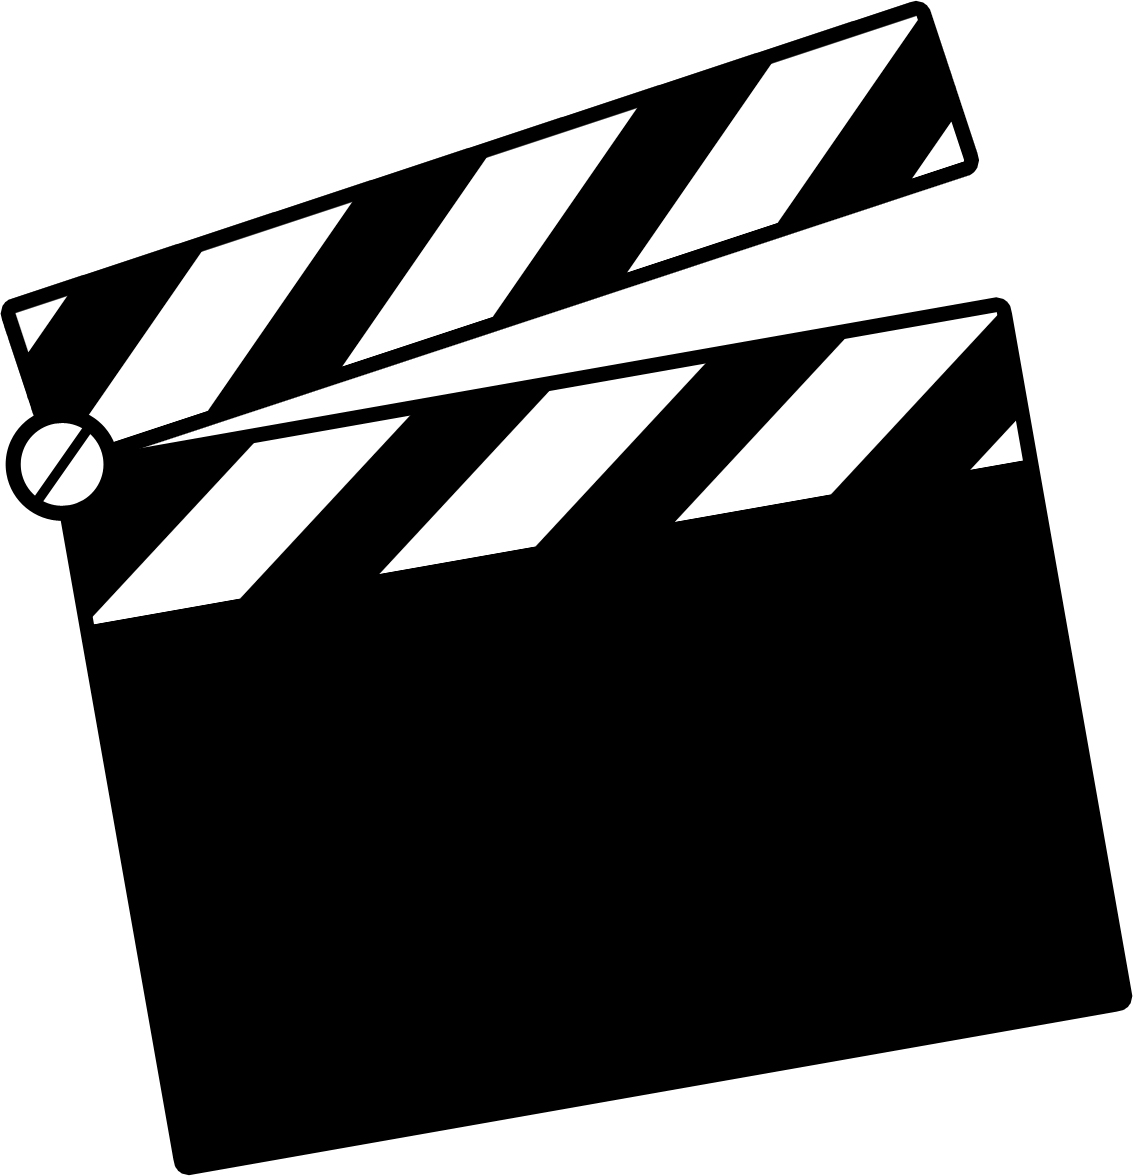 Clip Arts Related To : film clapper. view all Clapboard Cliparts). 